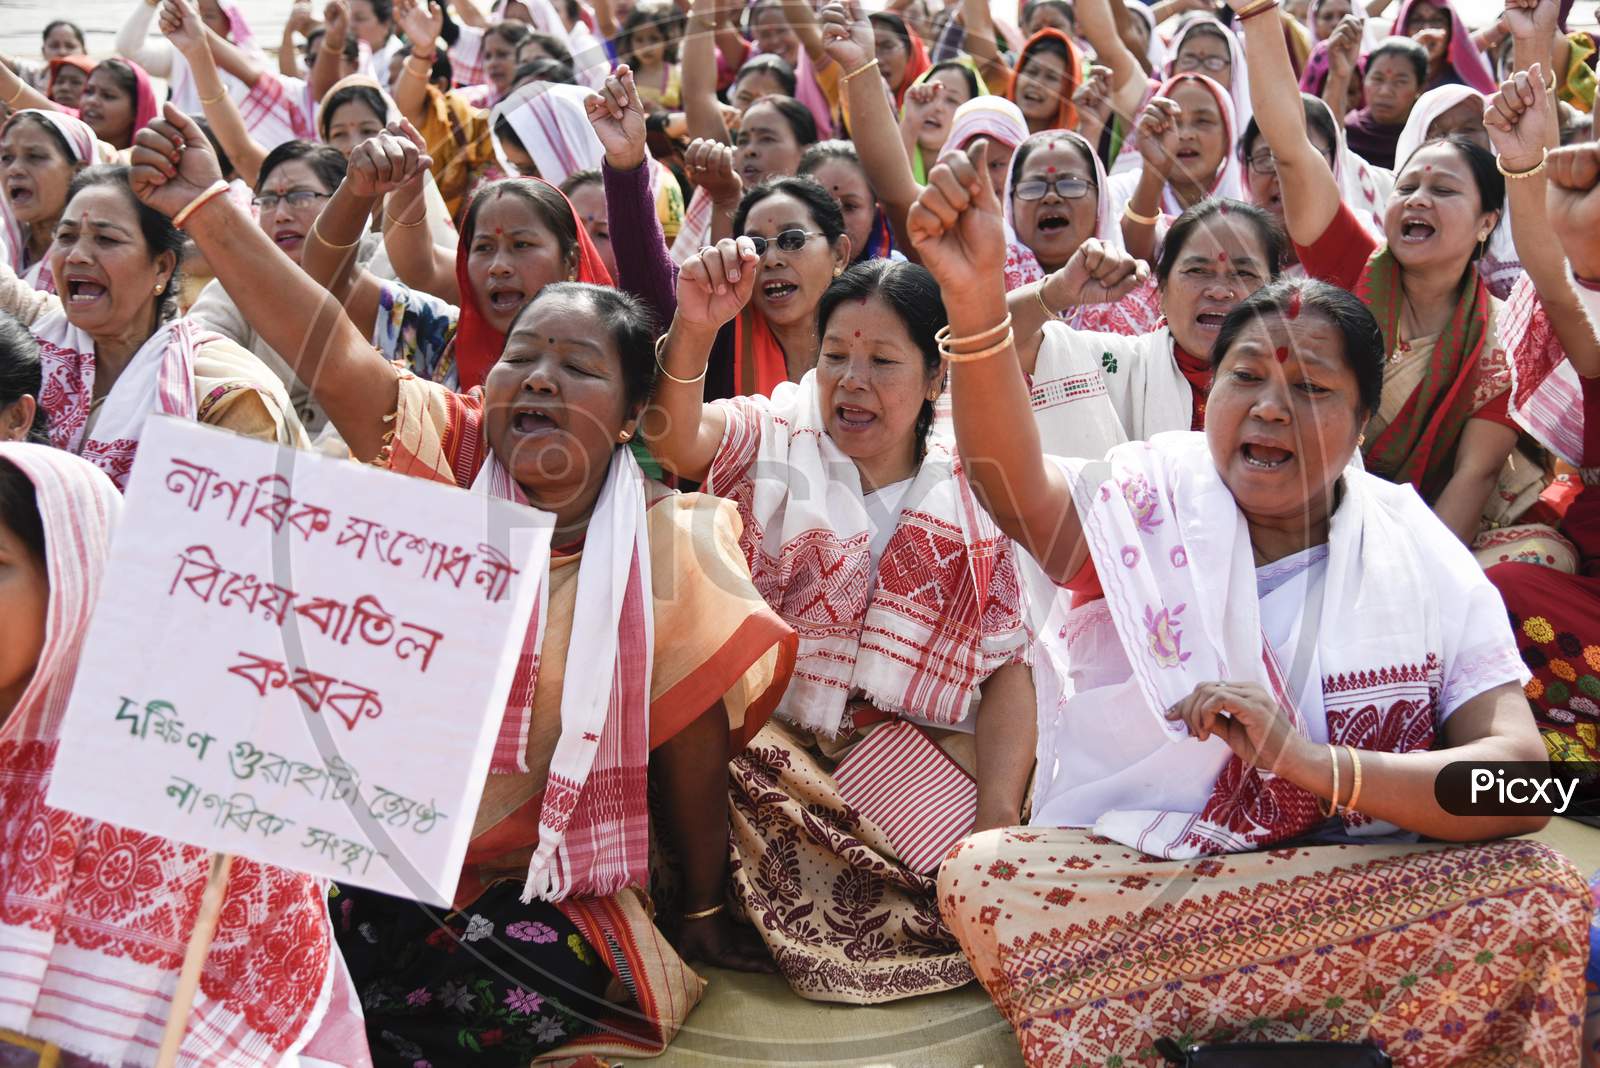 Women Citizens During A Protest Against The Citizenship (Amendment) Act, At Lakhora In Guwahati